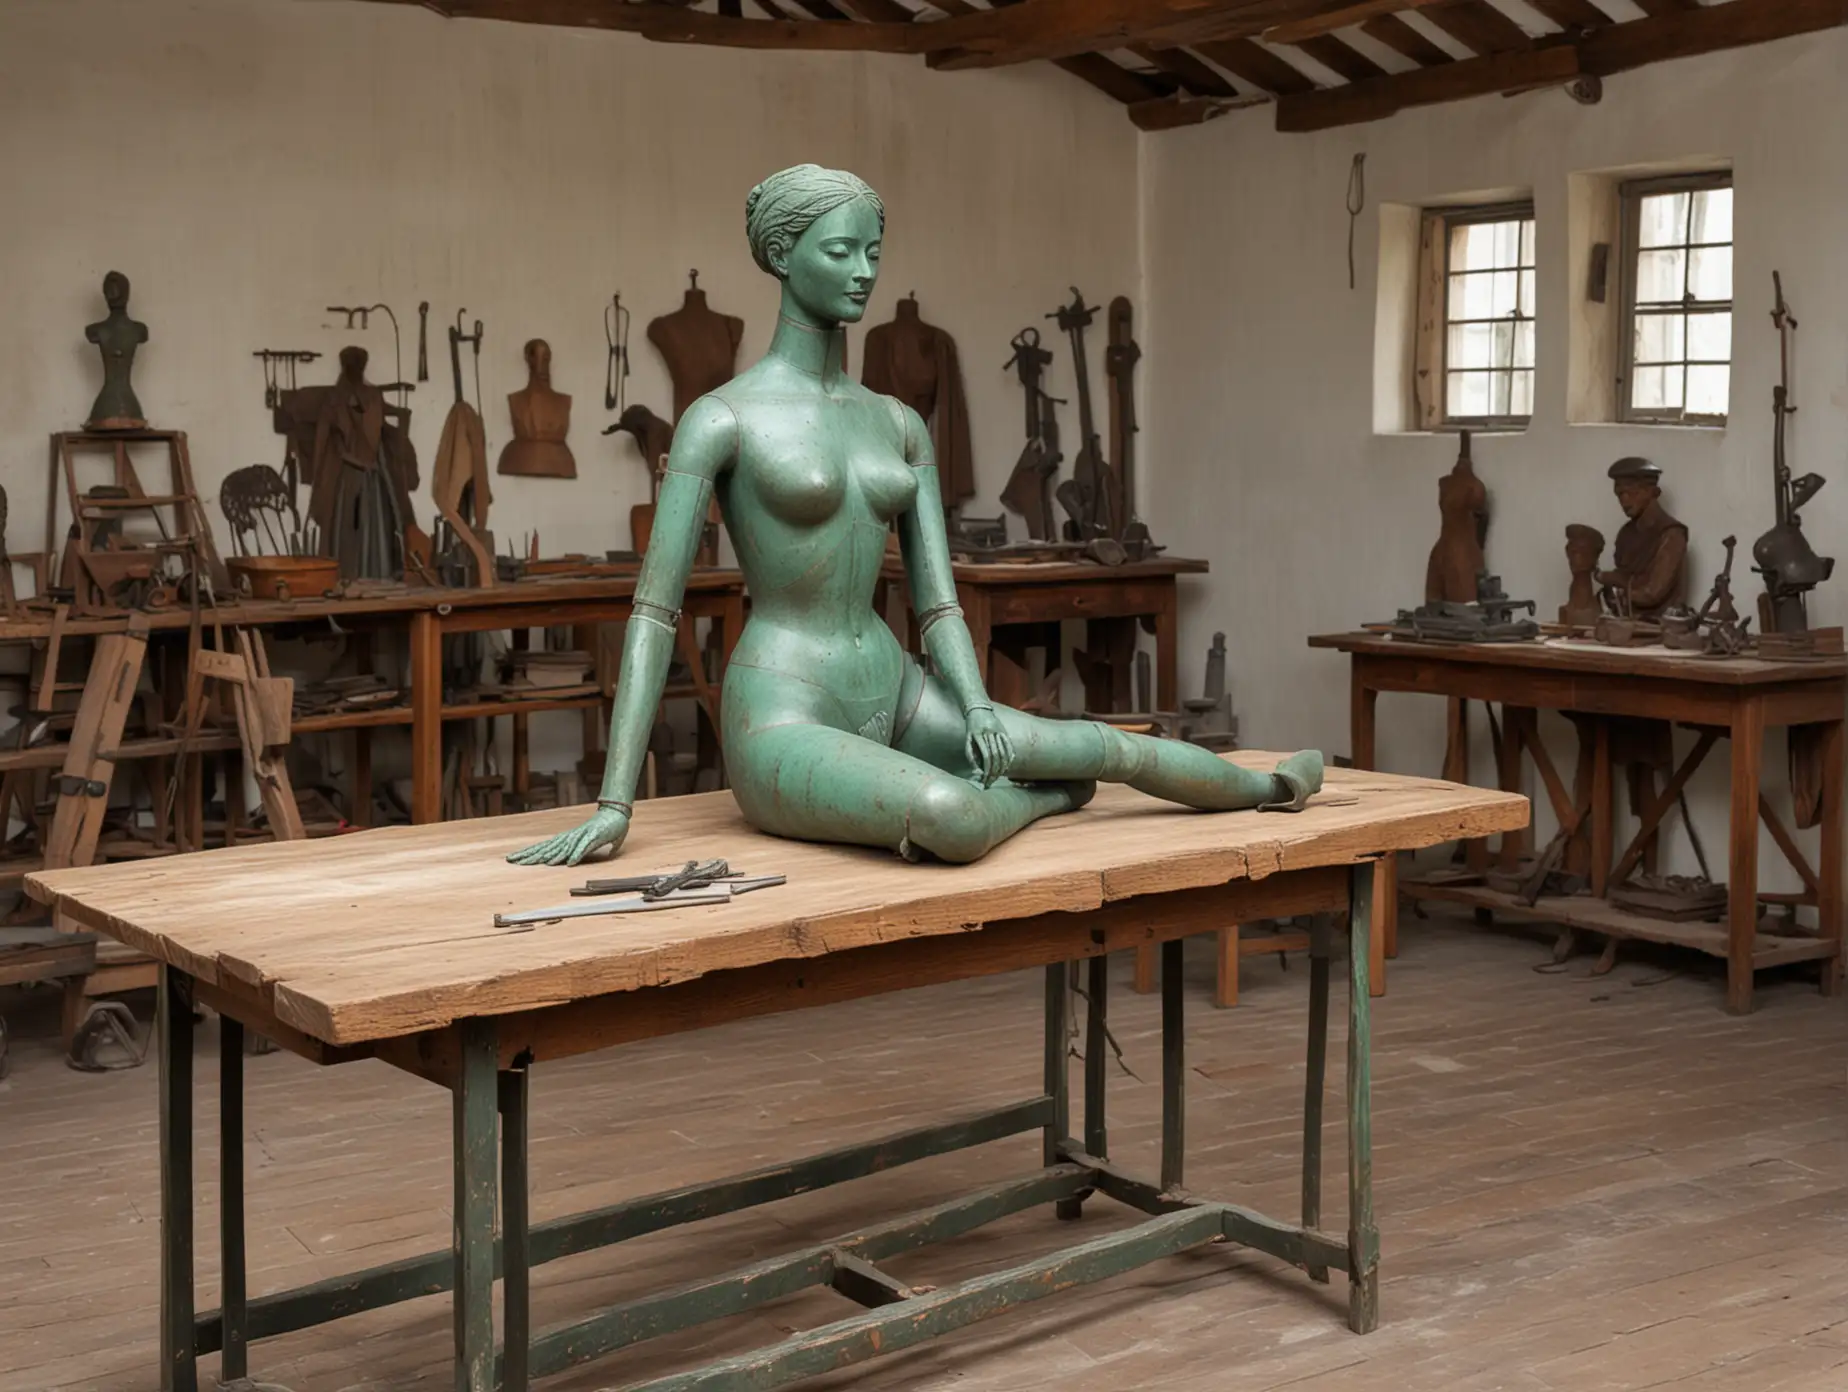 16th century workshop interior with a large half-constructed female green patina metal mannequin lying on a wooden table